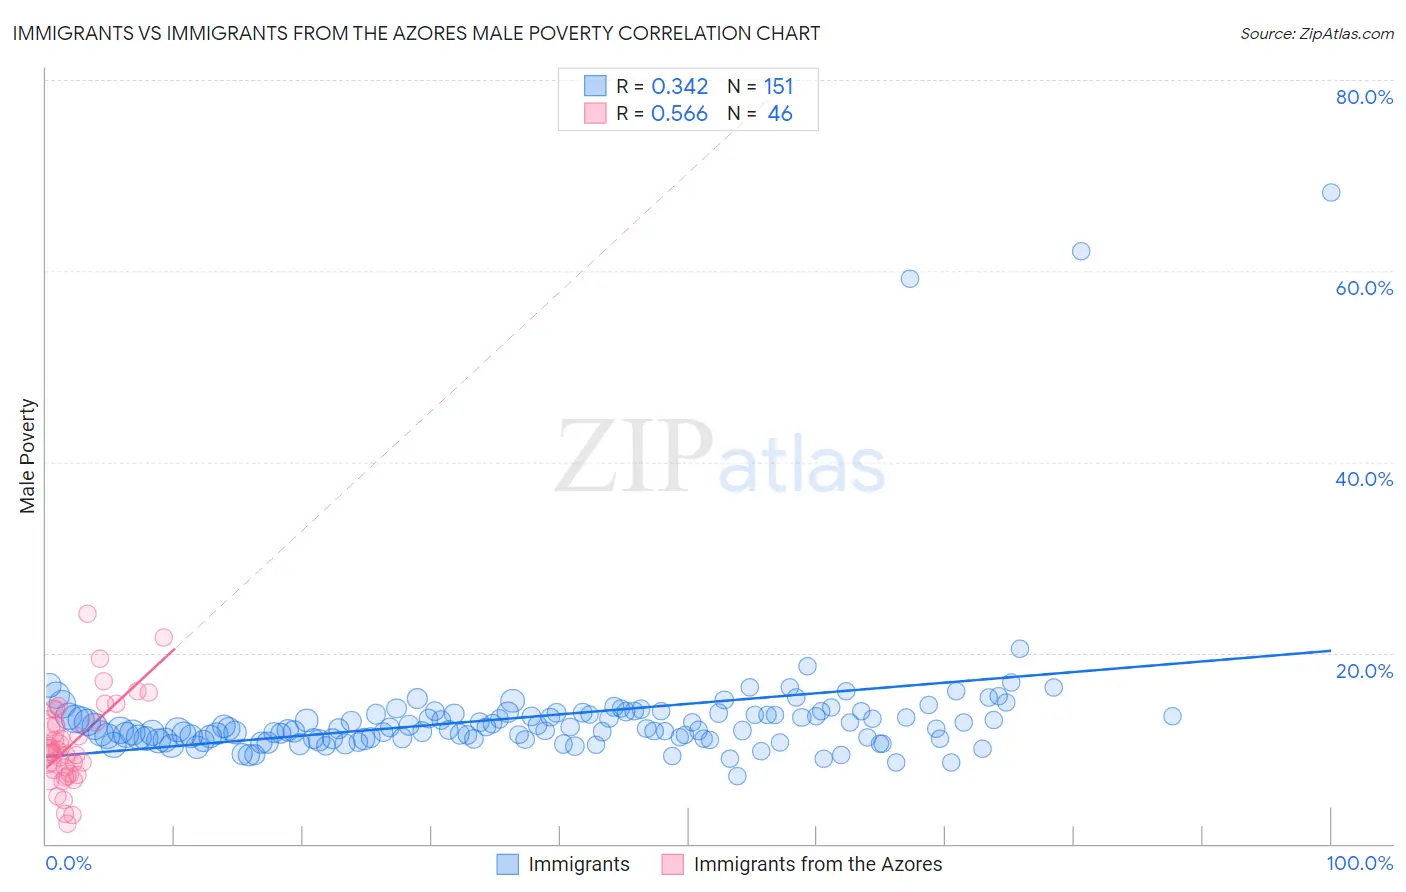 Immigrants vs Immigrants from the Azores Male Poverty